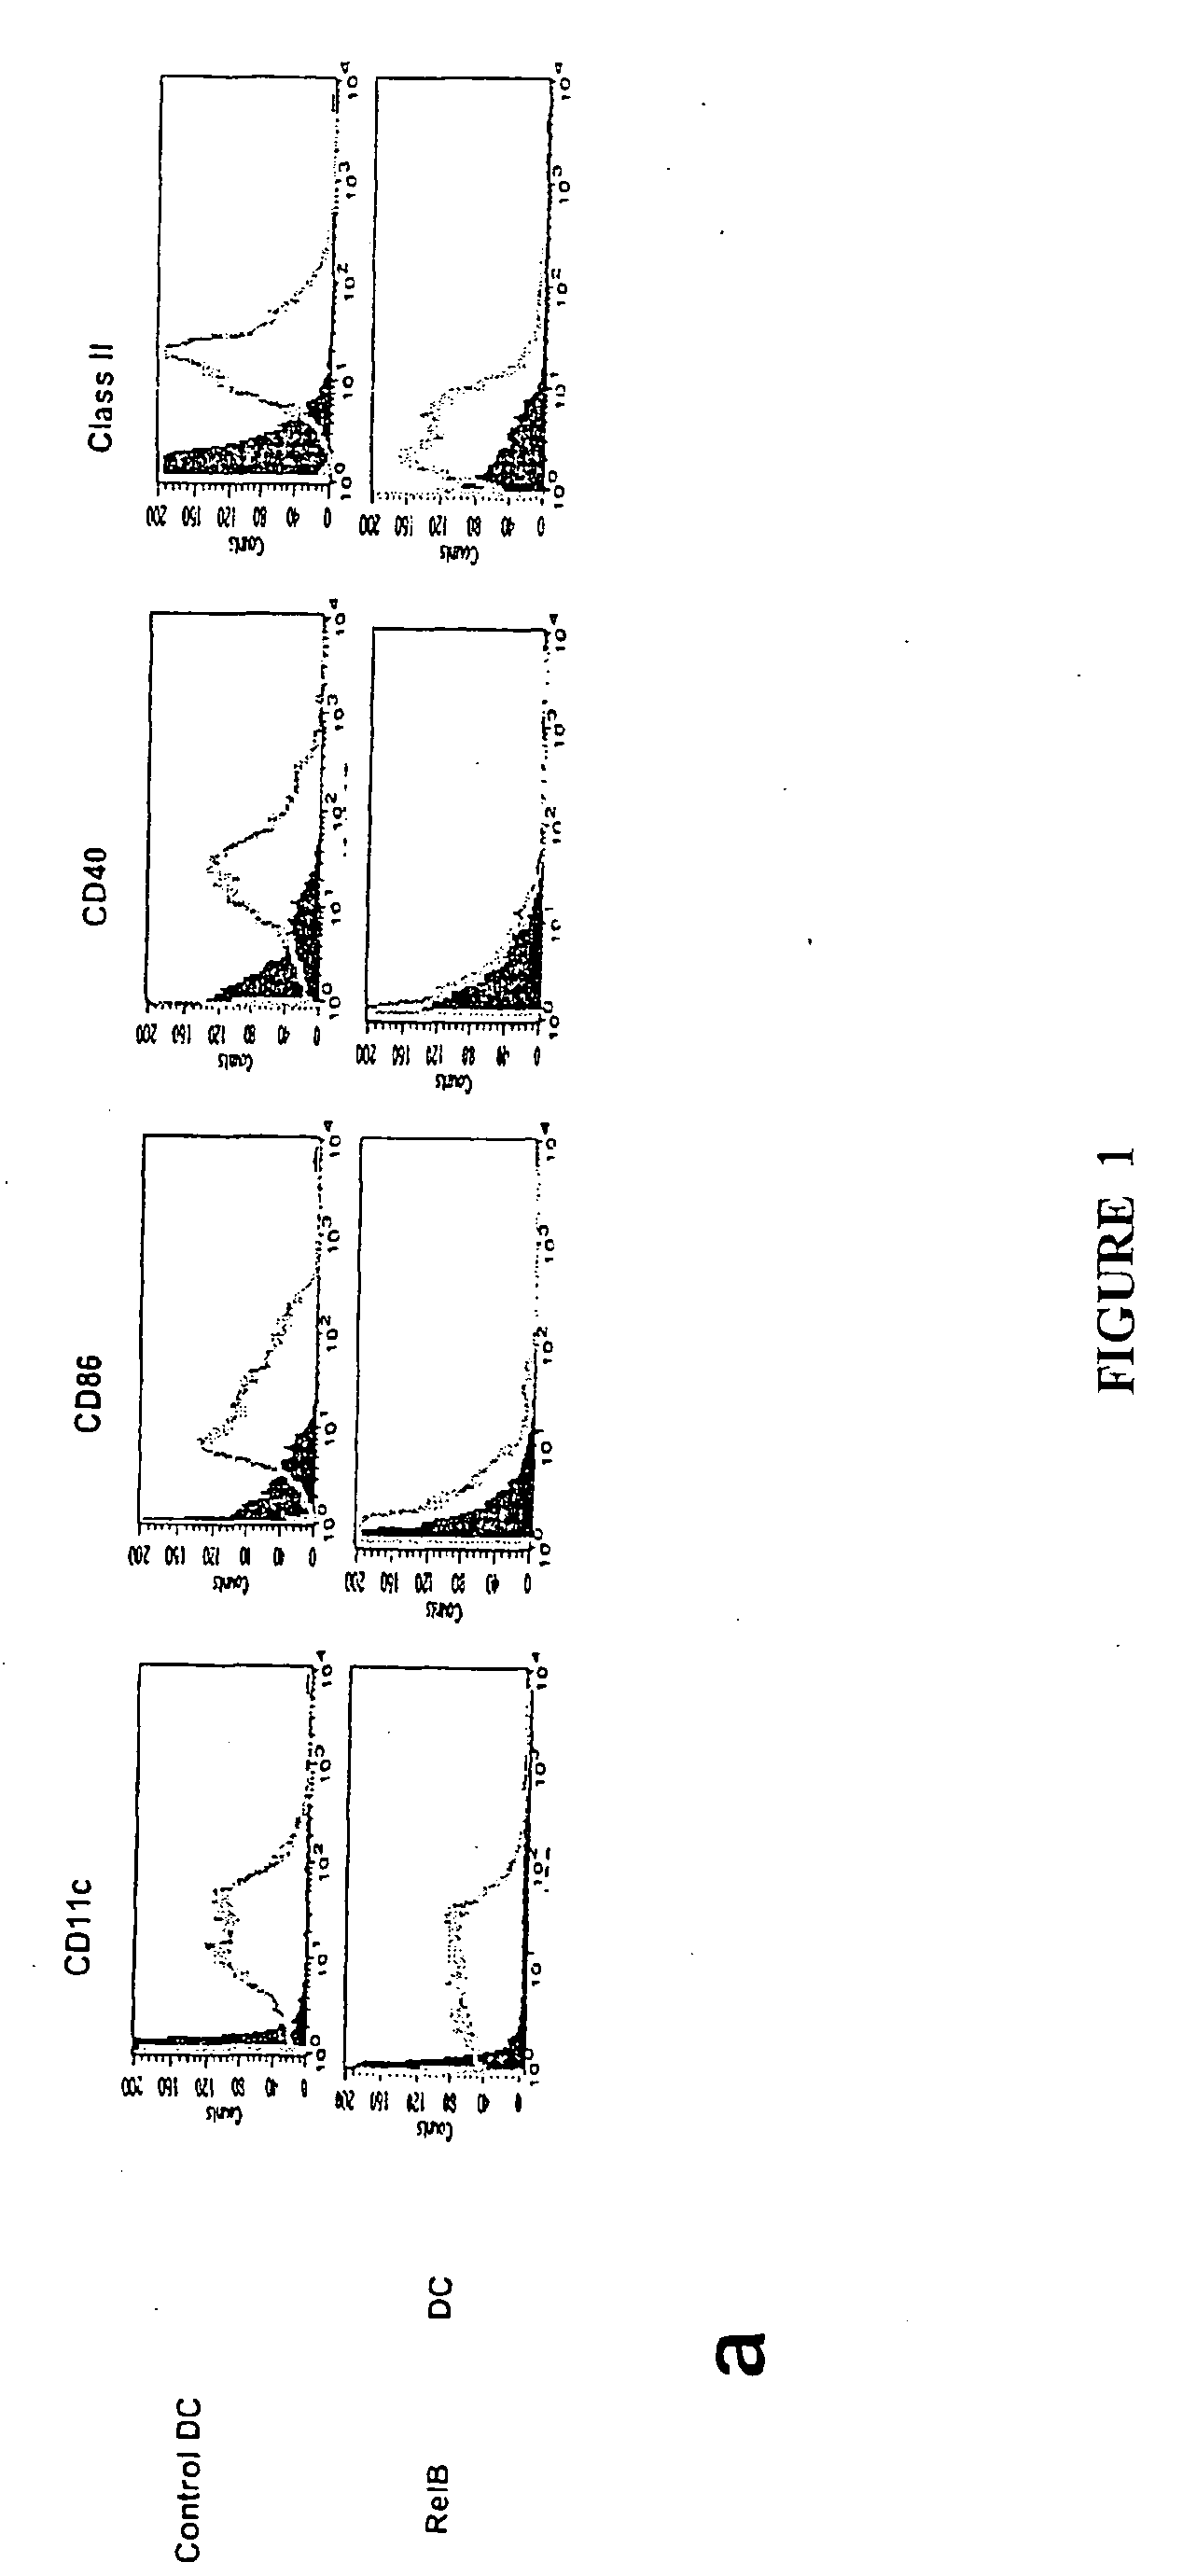 Immunomodulating compositions, processes for their production and uses therefor